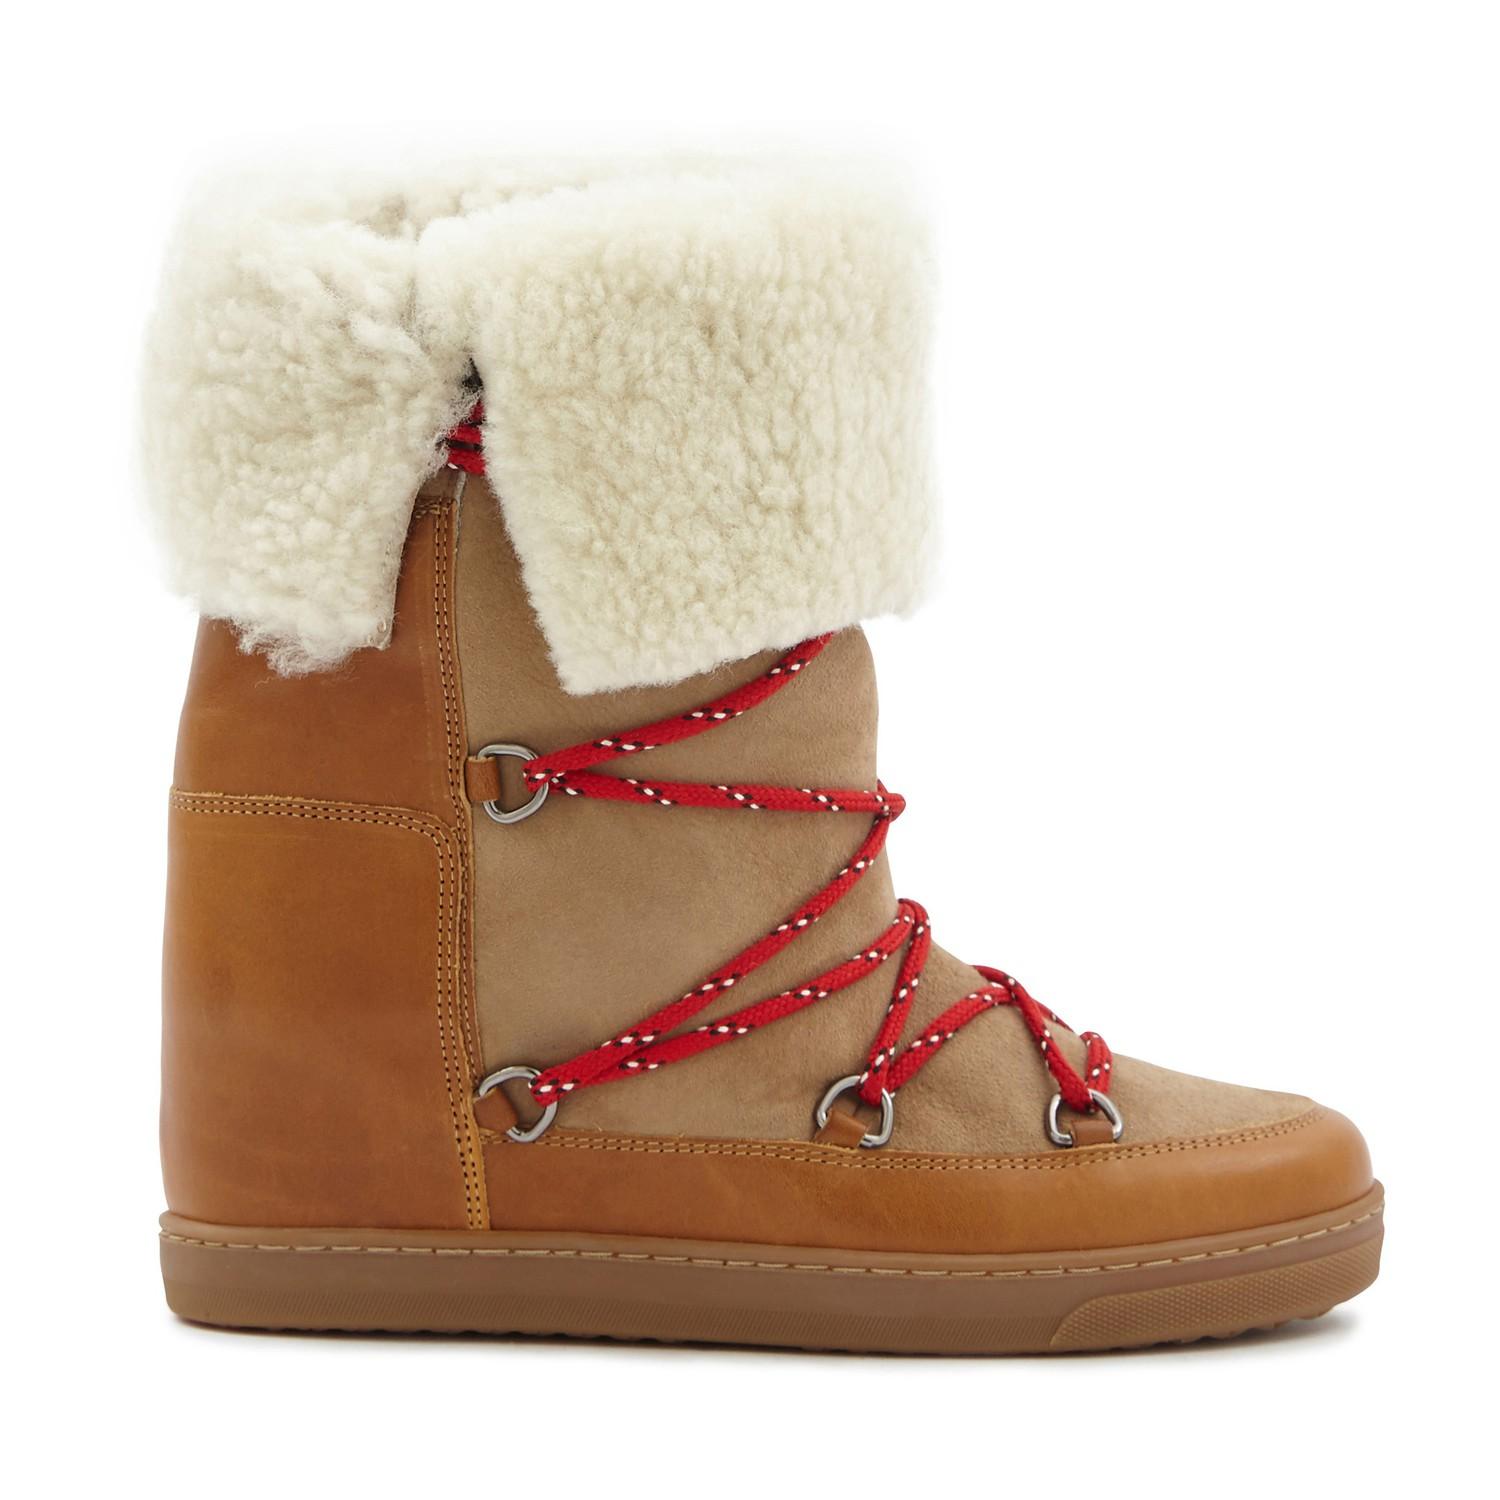 Isabel Marant Nowly Snow Boots in Natural - Lyst